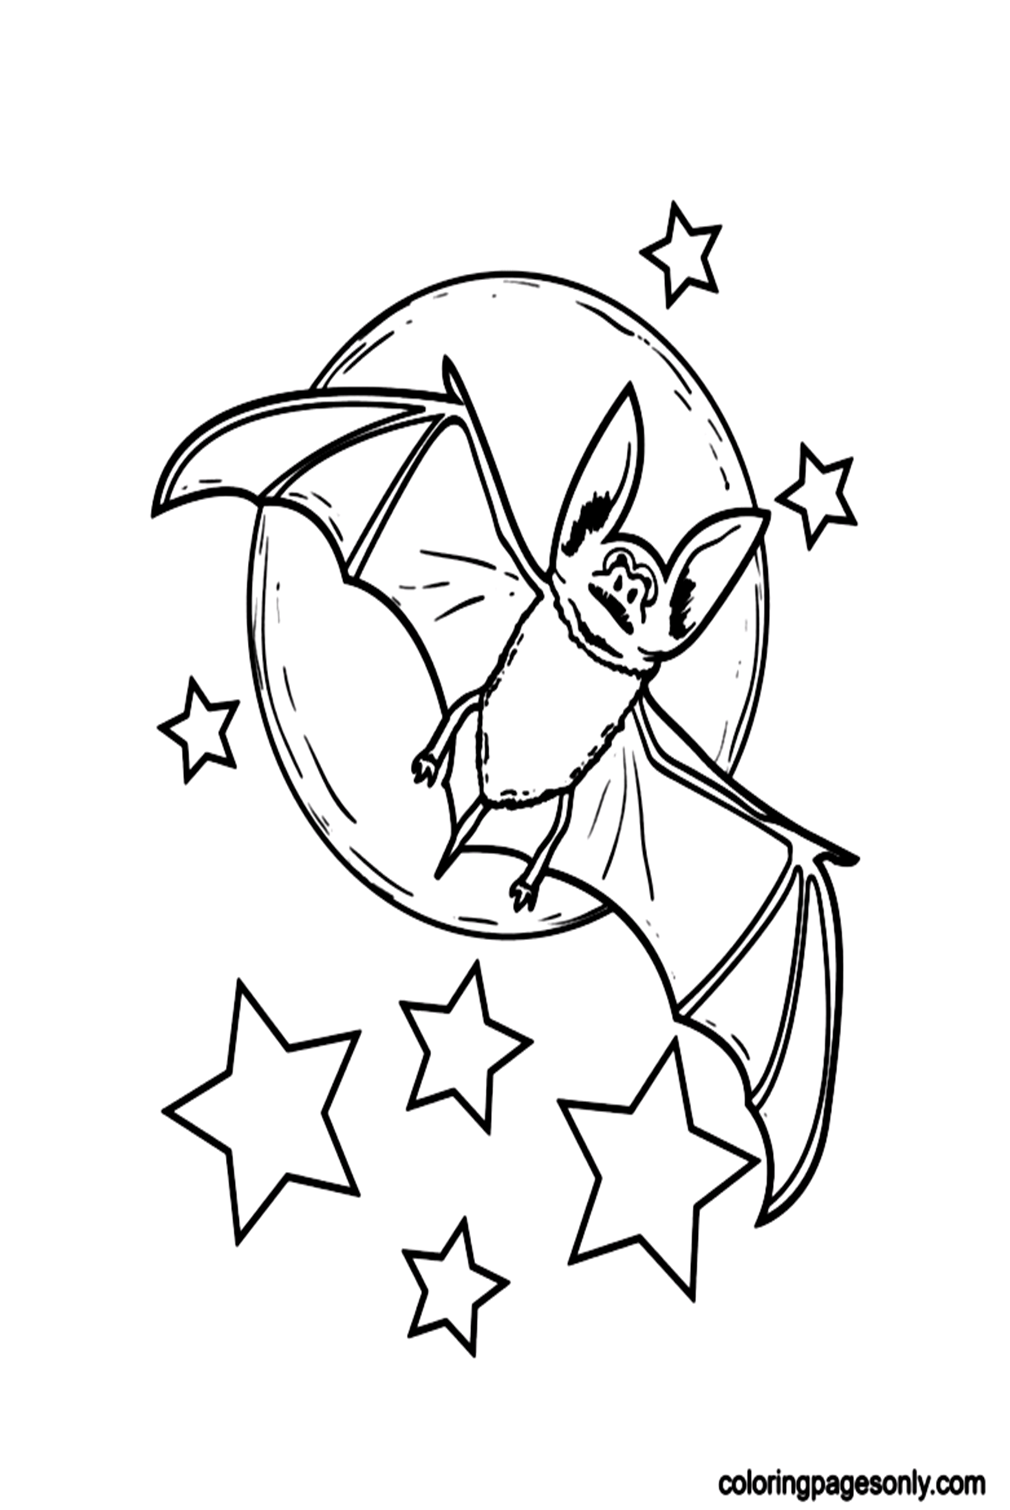 Halloween Bat and Stars Coloring Page